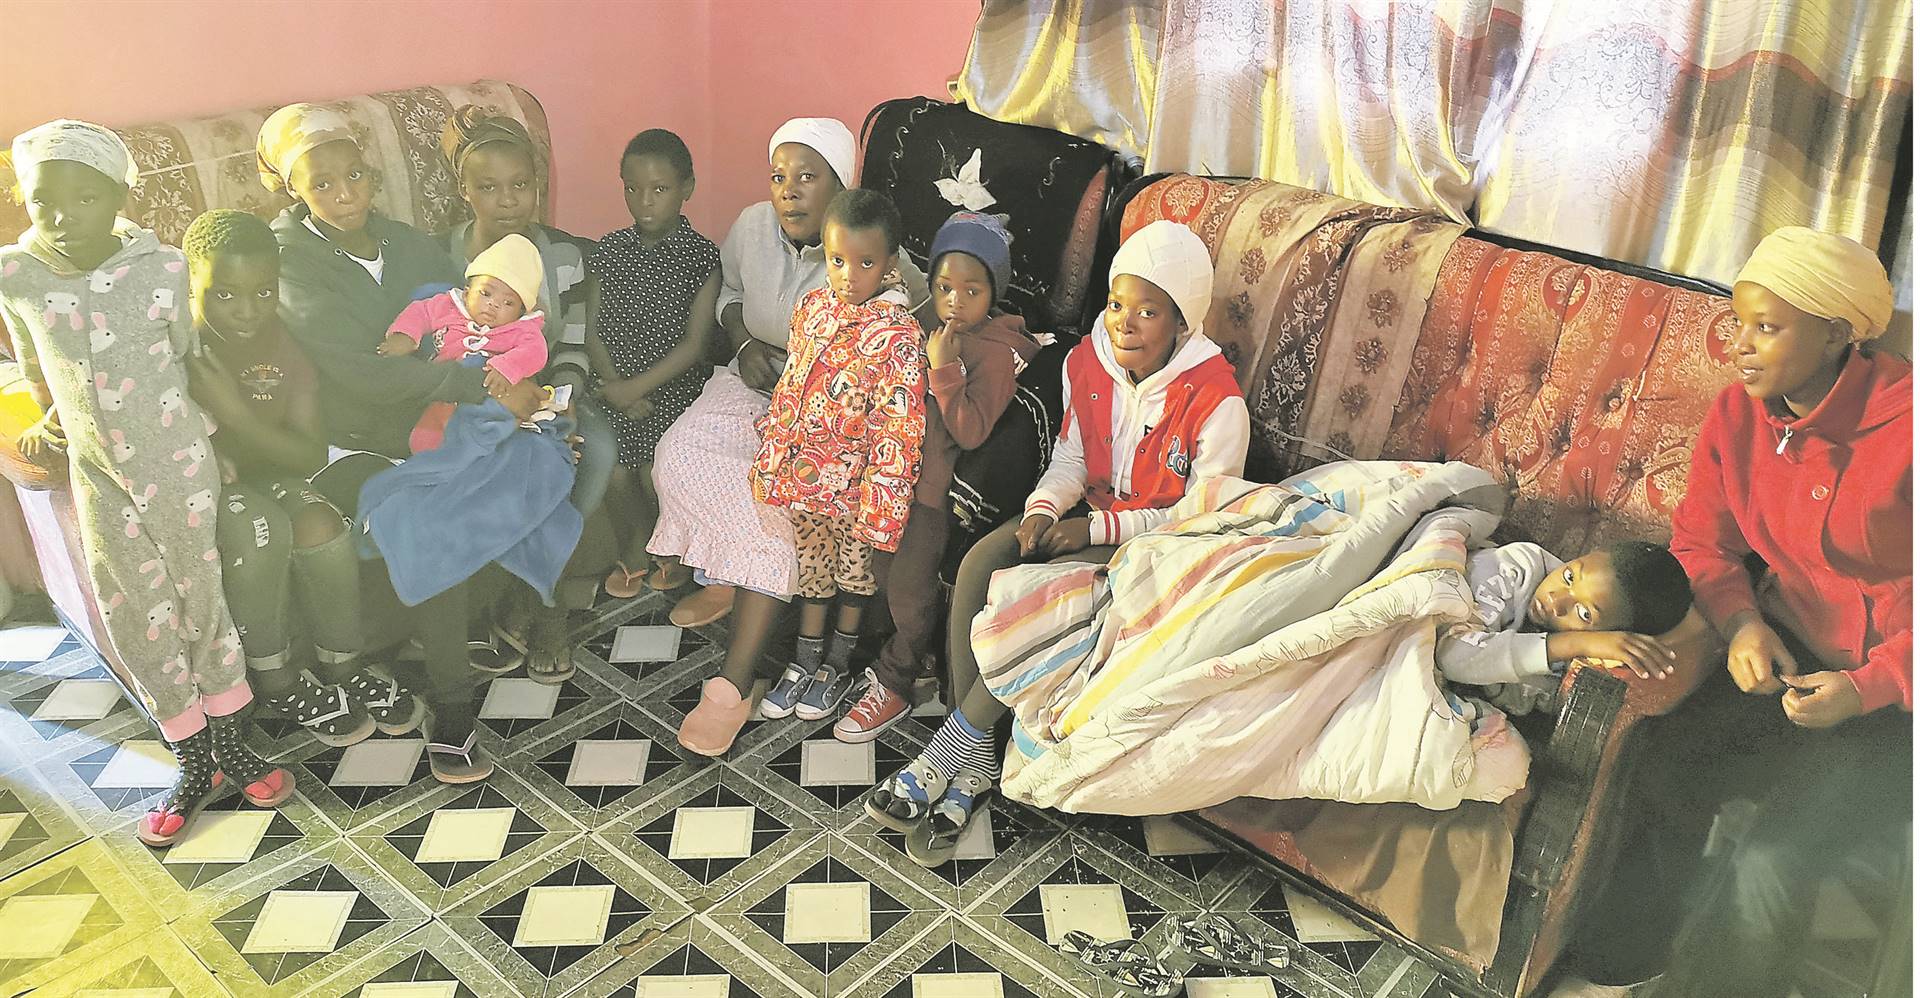 Nosapho Dukada (centre) with some of her children and grandchildren at their home in New Rest in Qokolweni near Mthatha. Picture: Lubabalo Ngcukana/City Press